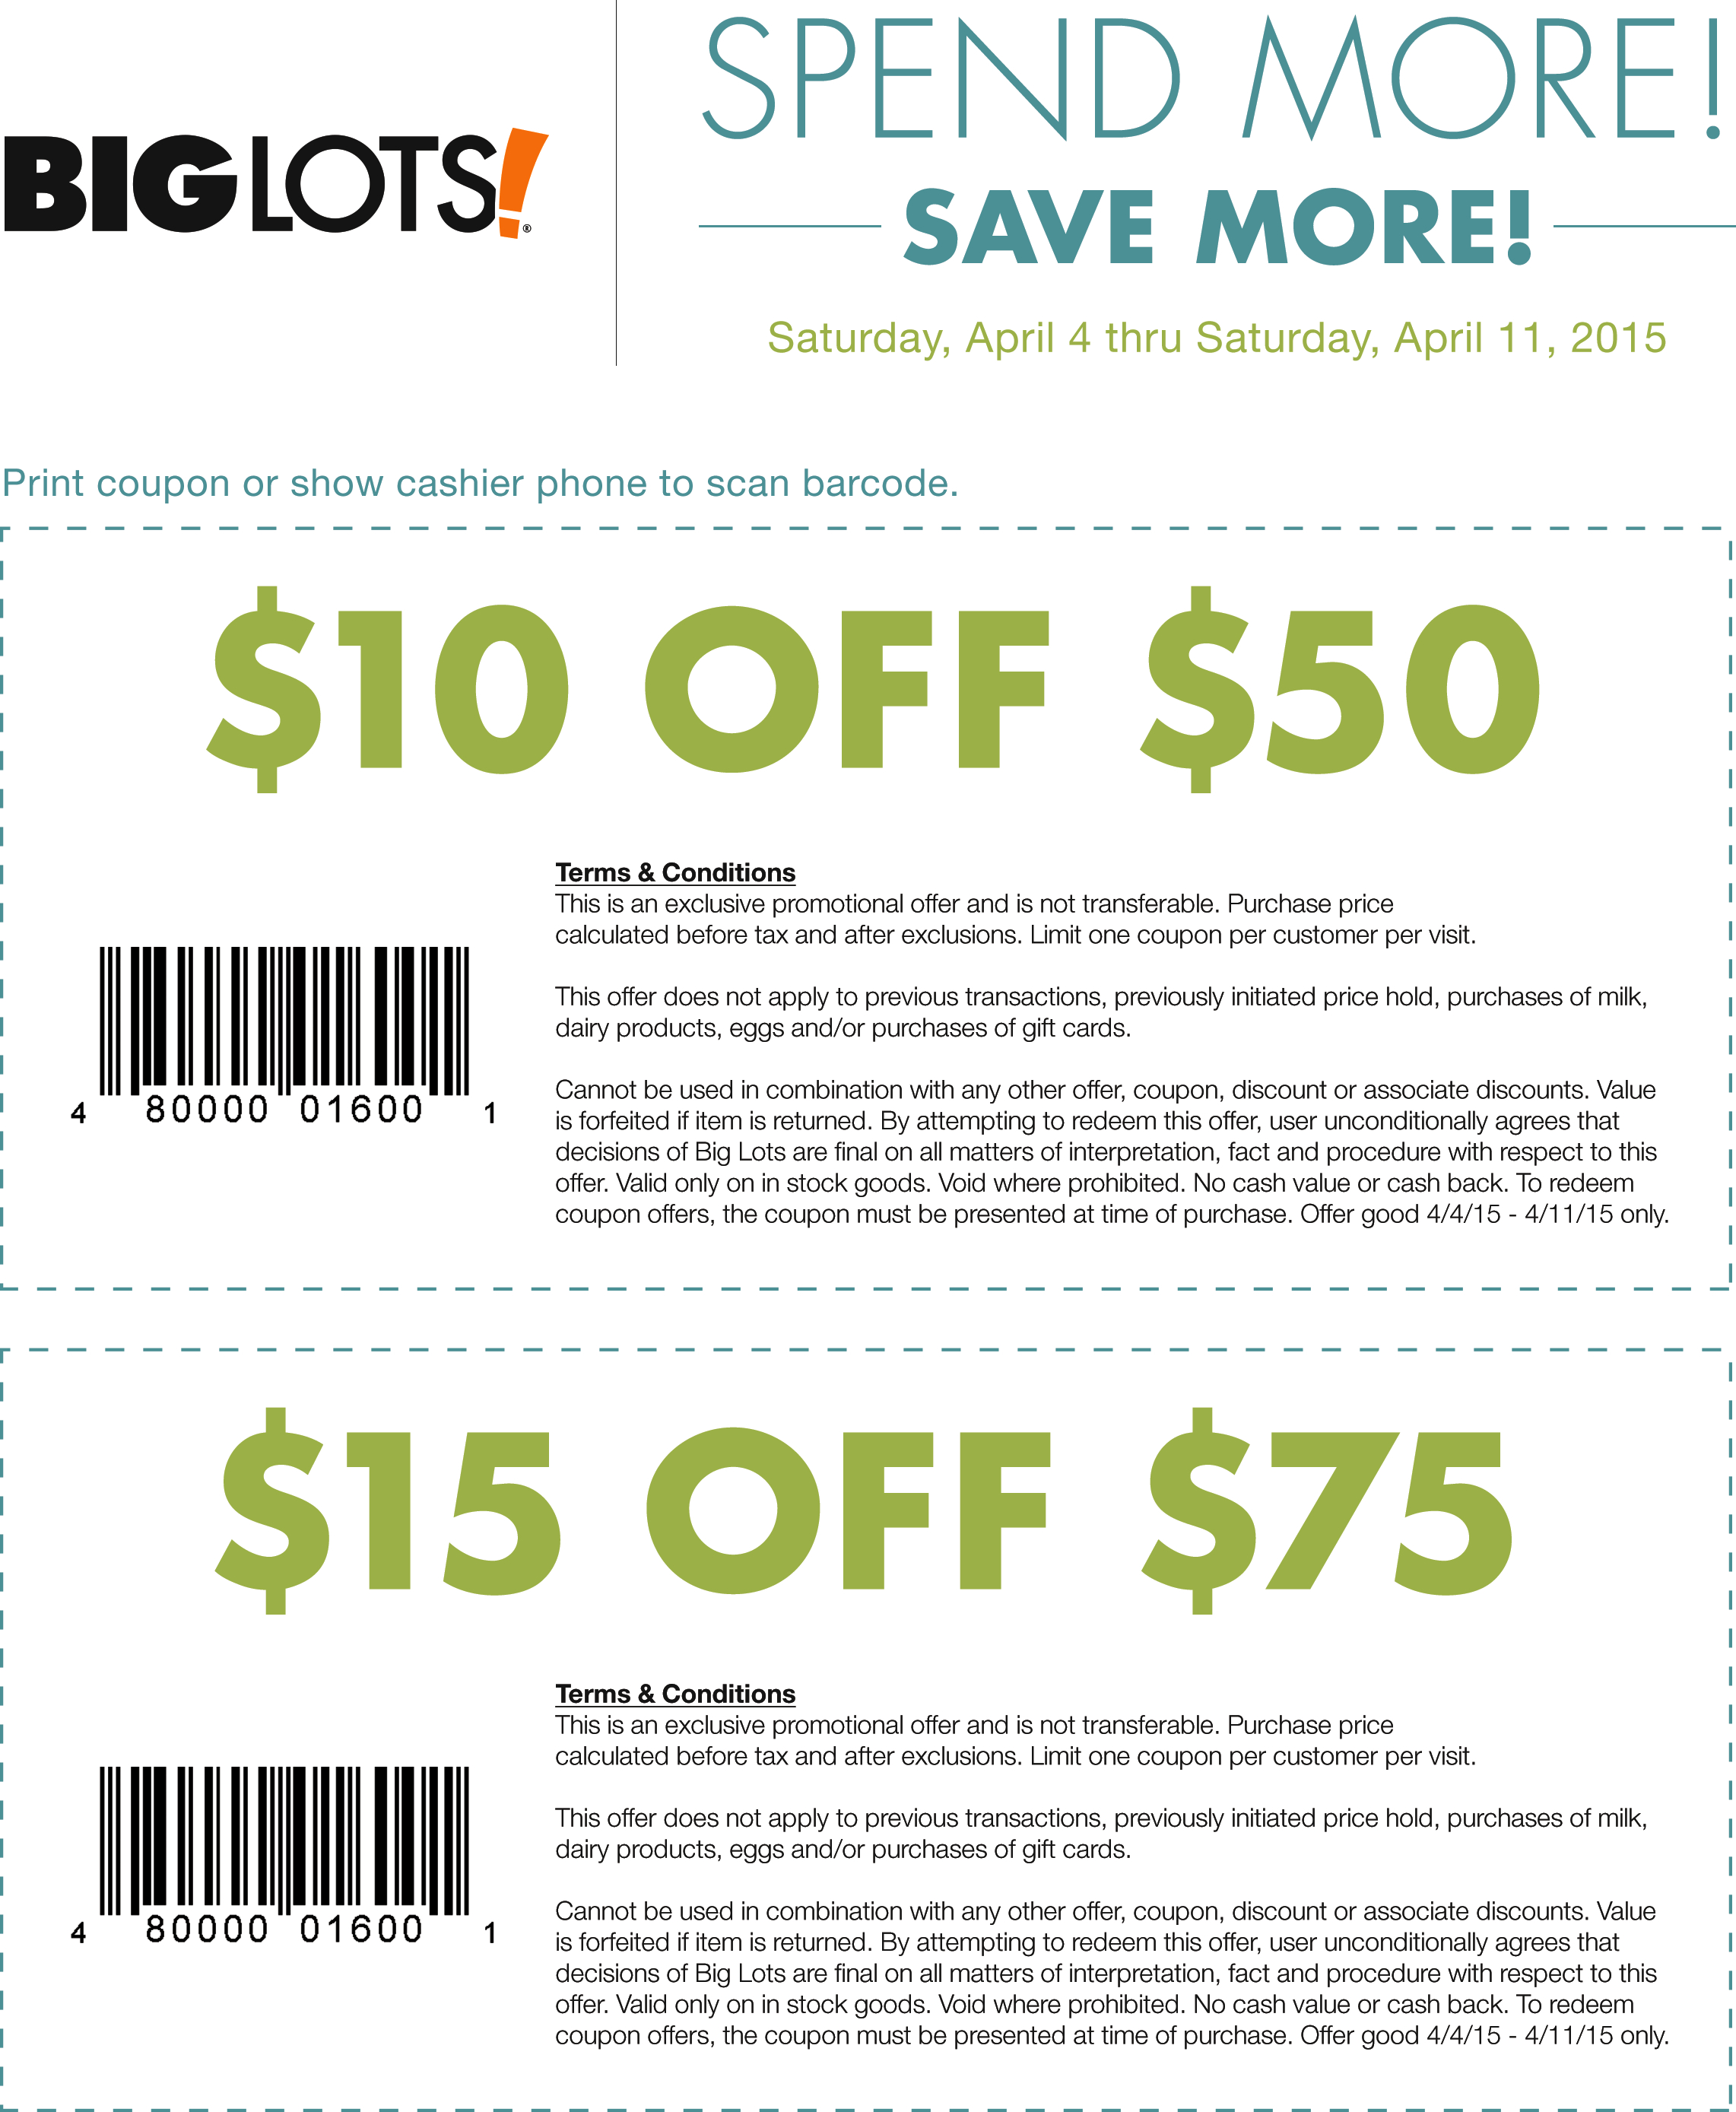 American Eagle Coupons Printable (74+ Images In Collection) Page 2 - Free Printable American Eagle Coupons